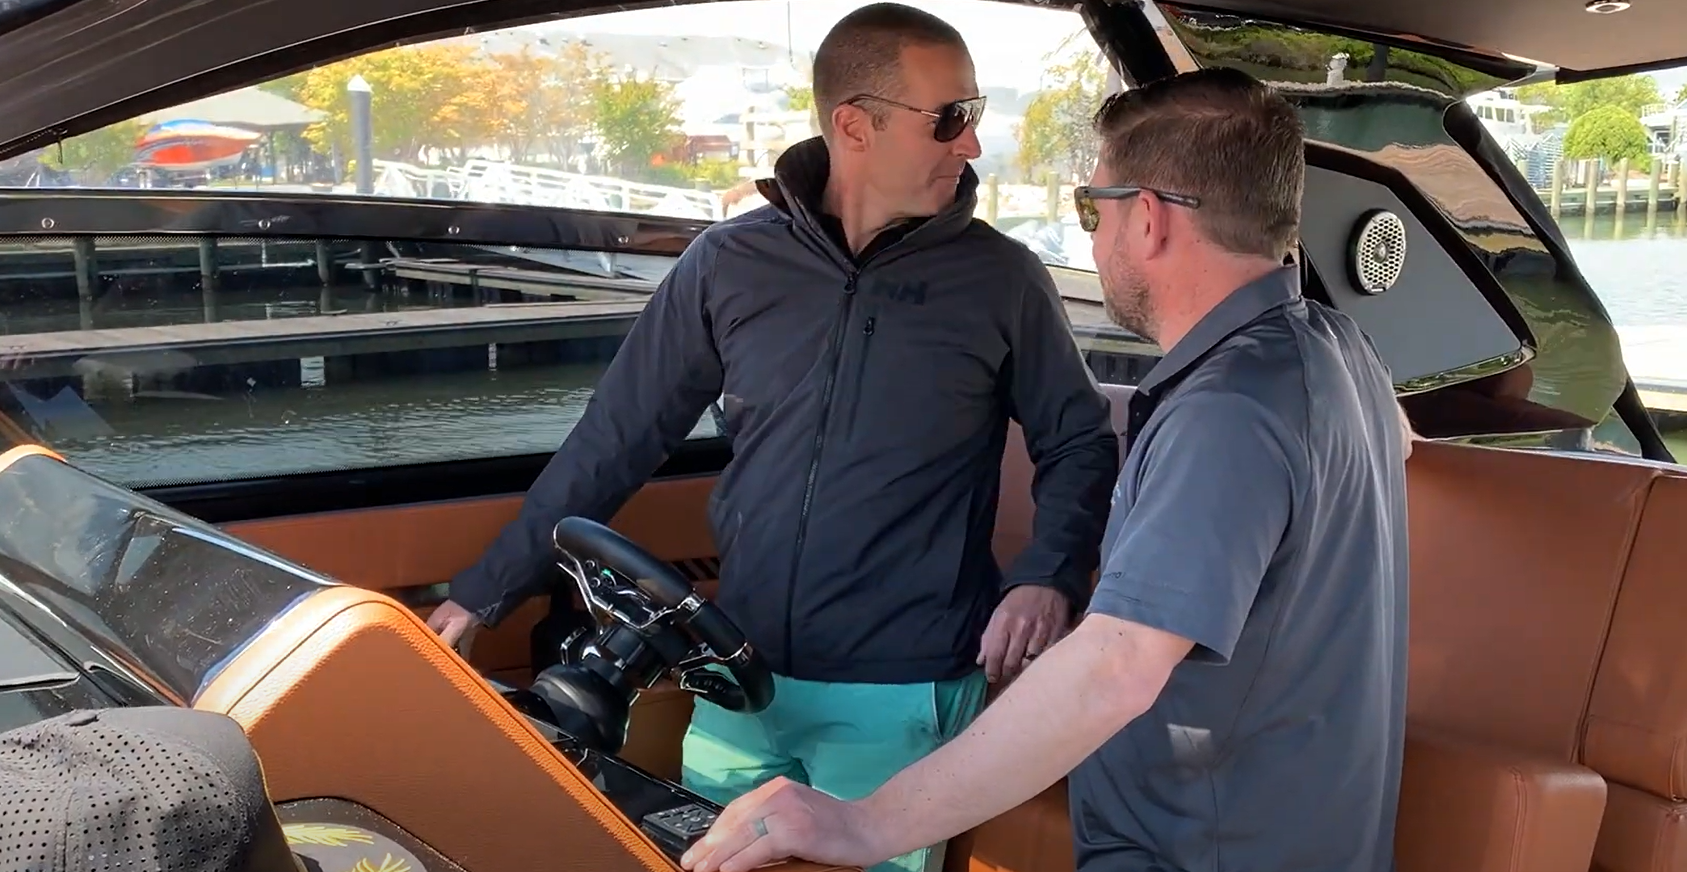 VIDEO: New Boat Buyers Get In-Depth Training from Pros